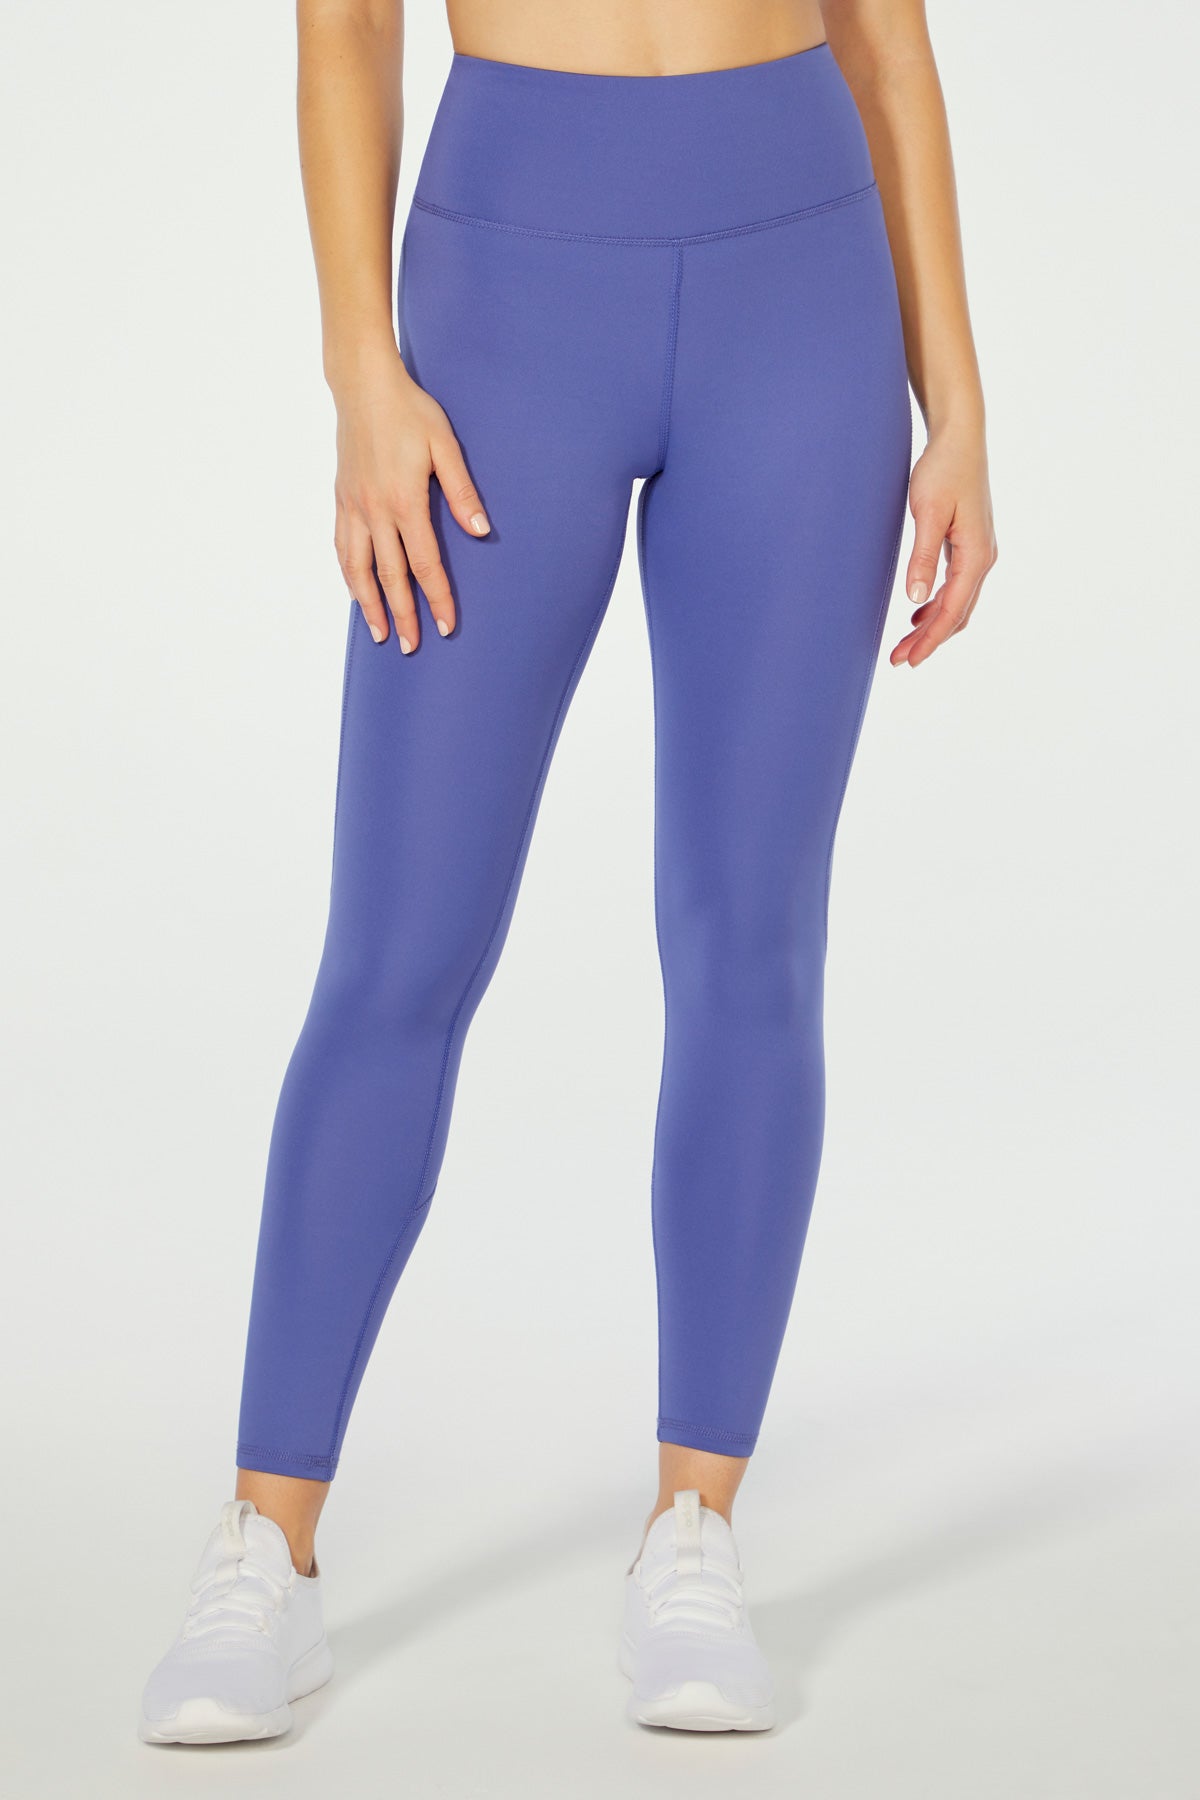 legging_front_view